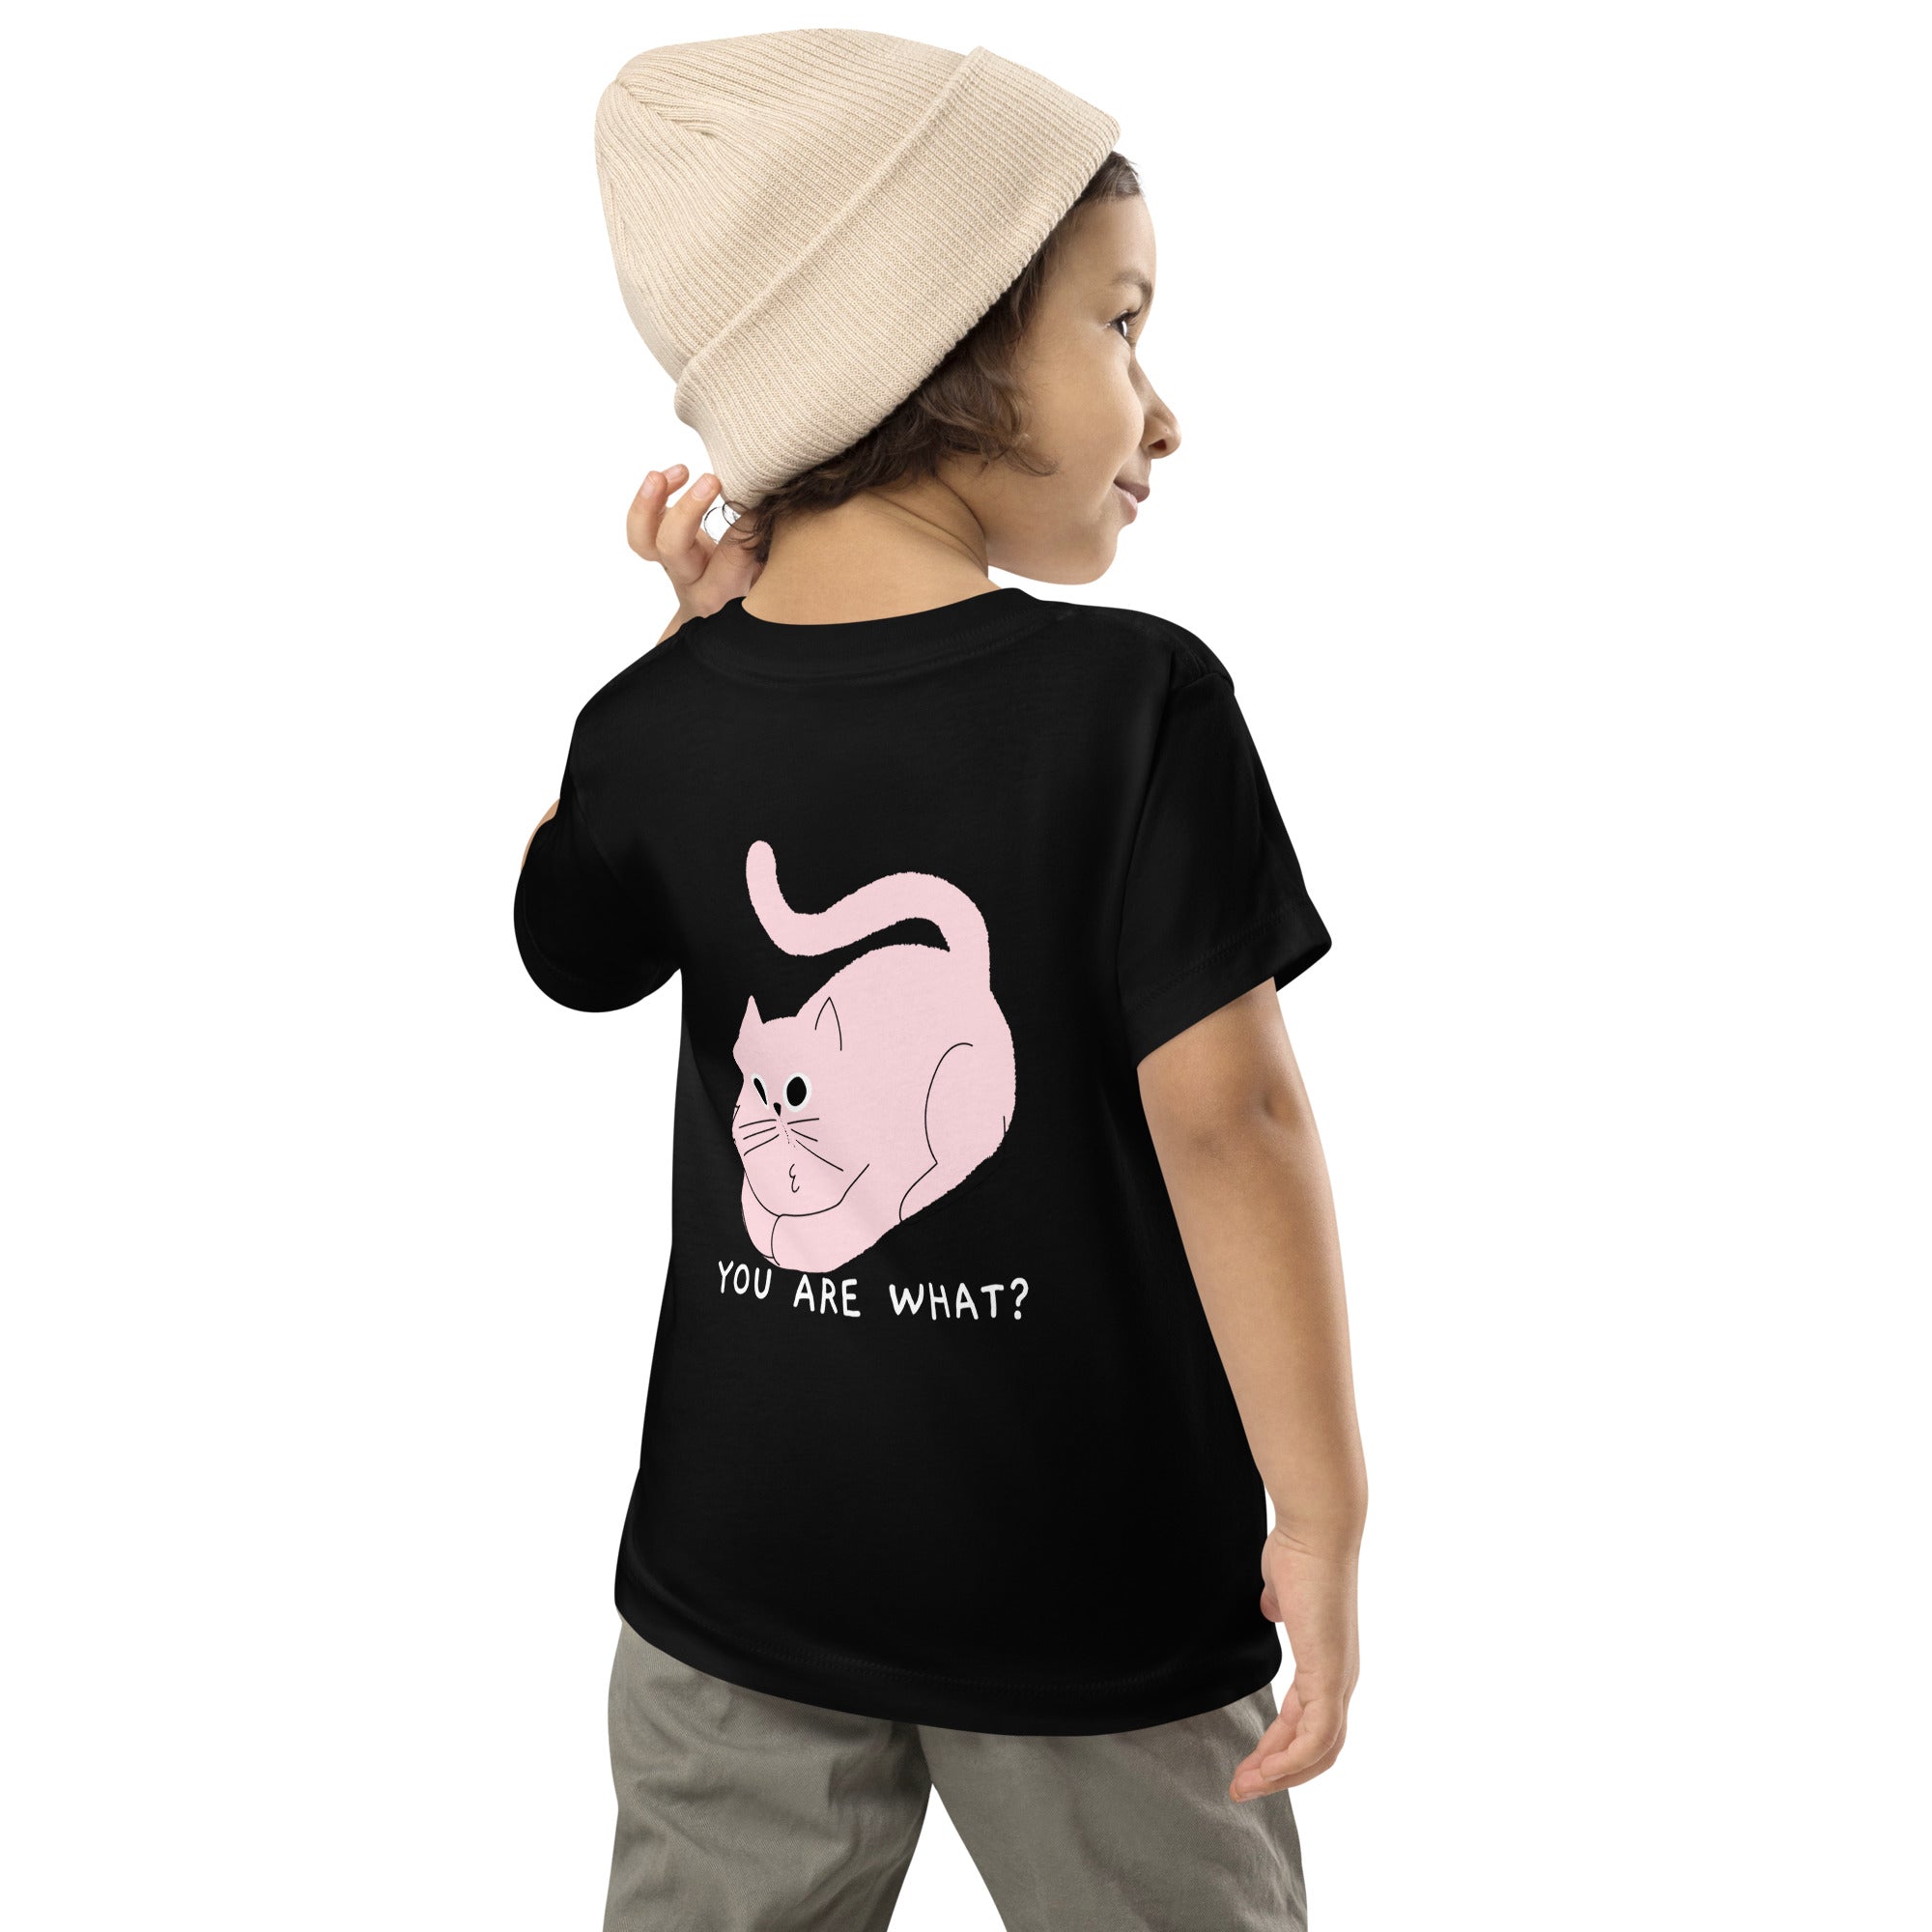 You are what? - Toddler Short Sleeve Tee (back print)